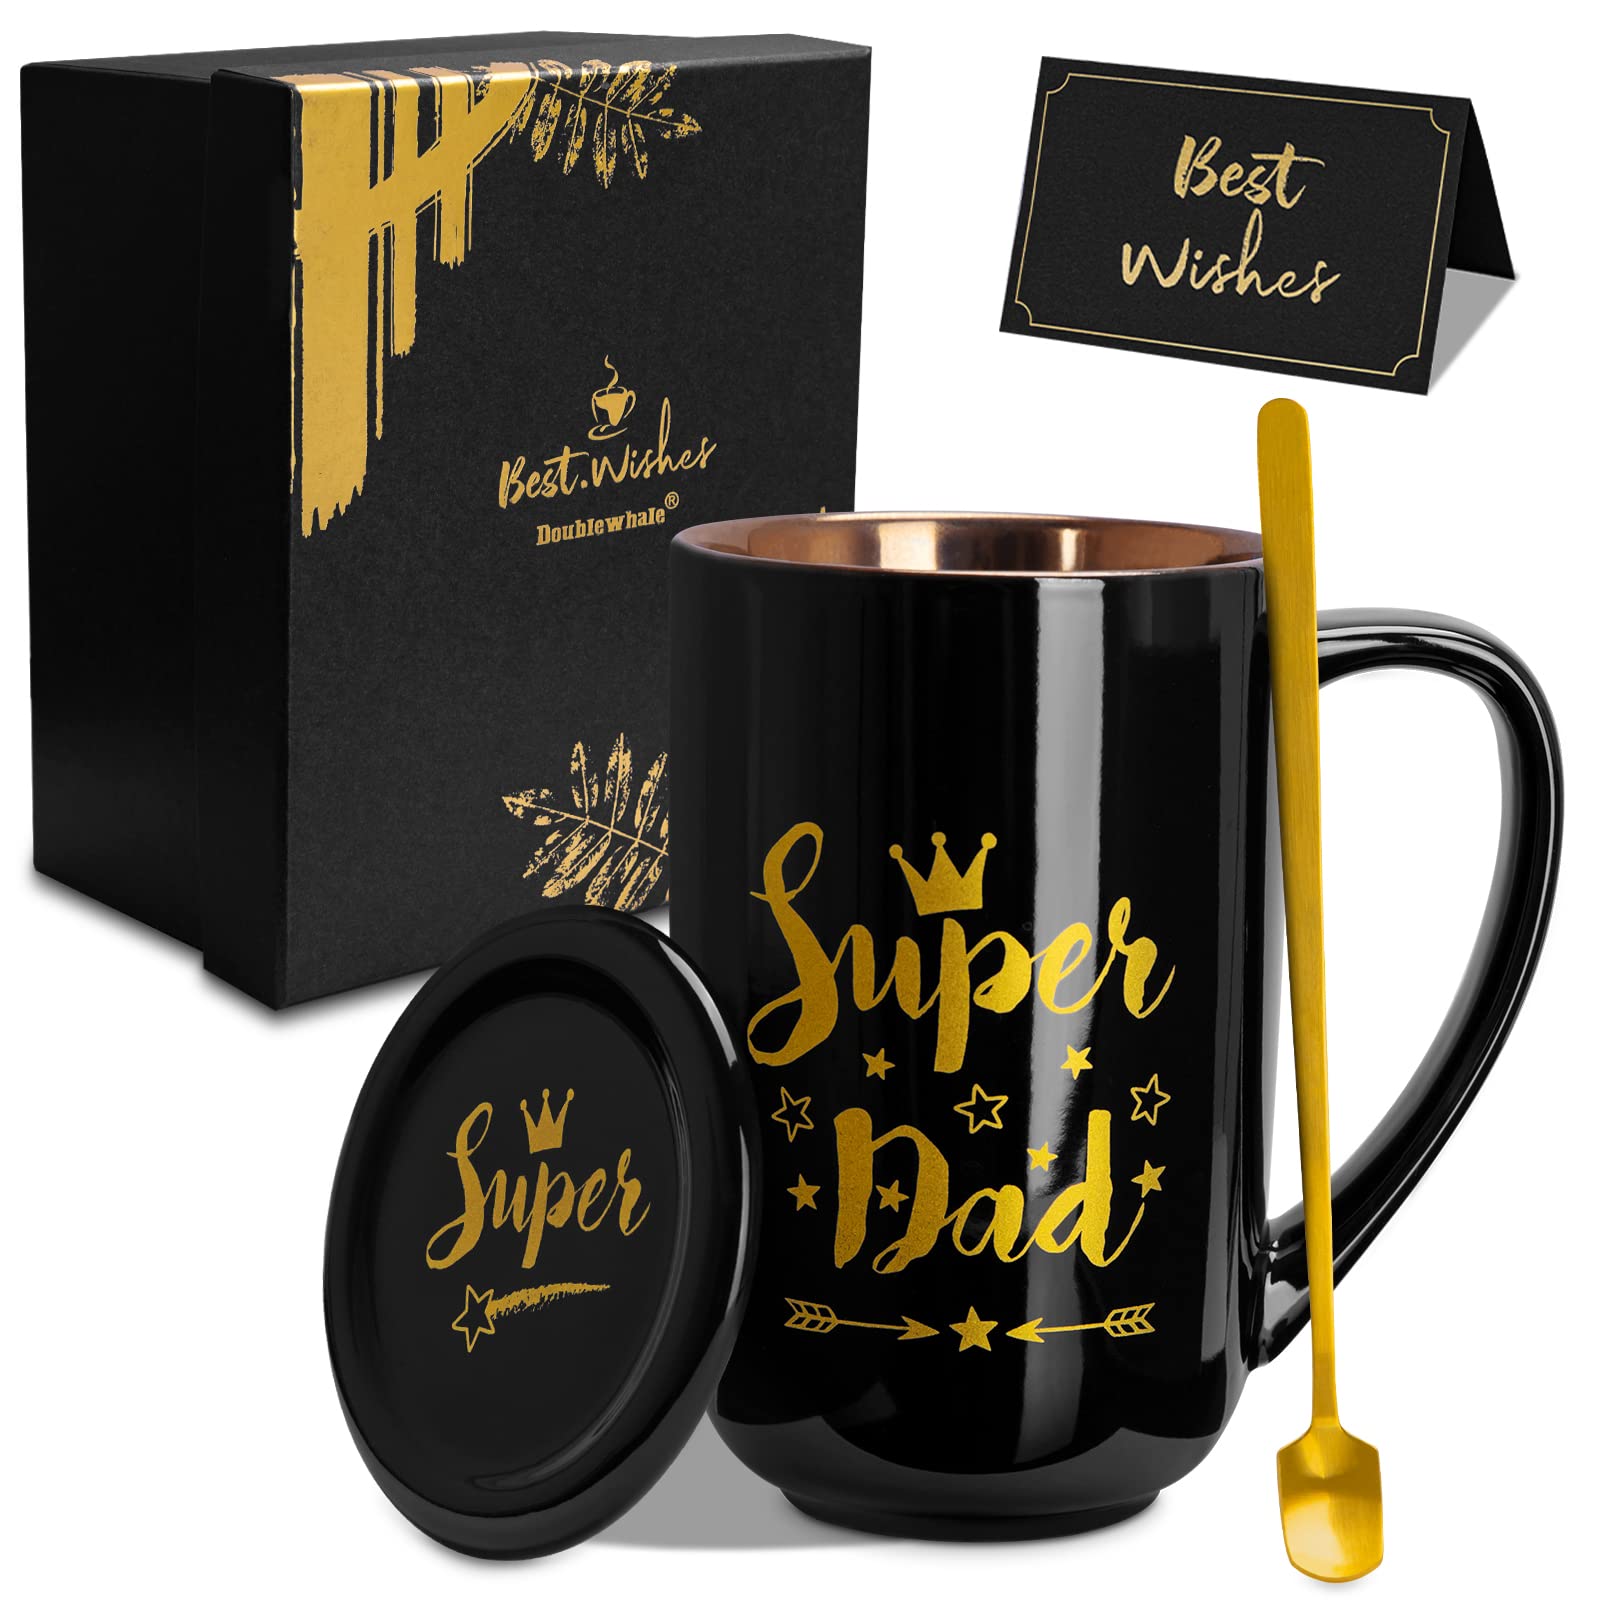 Mug,spoon,lid and best wishes card gift set